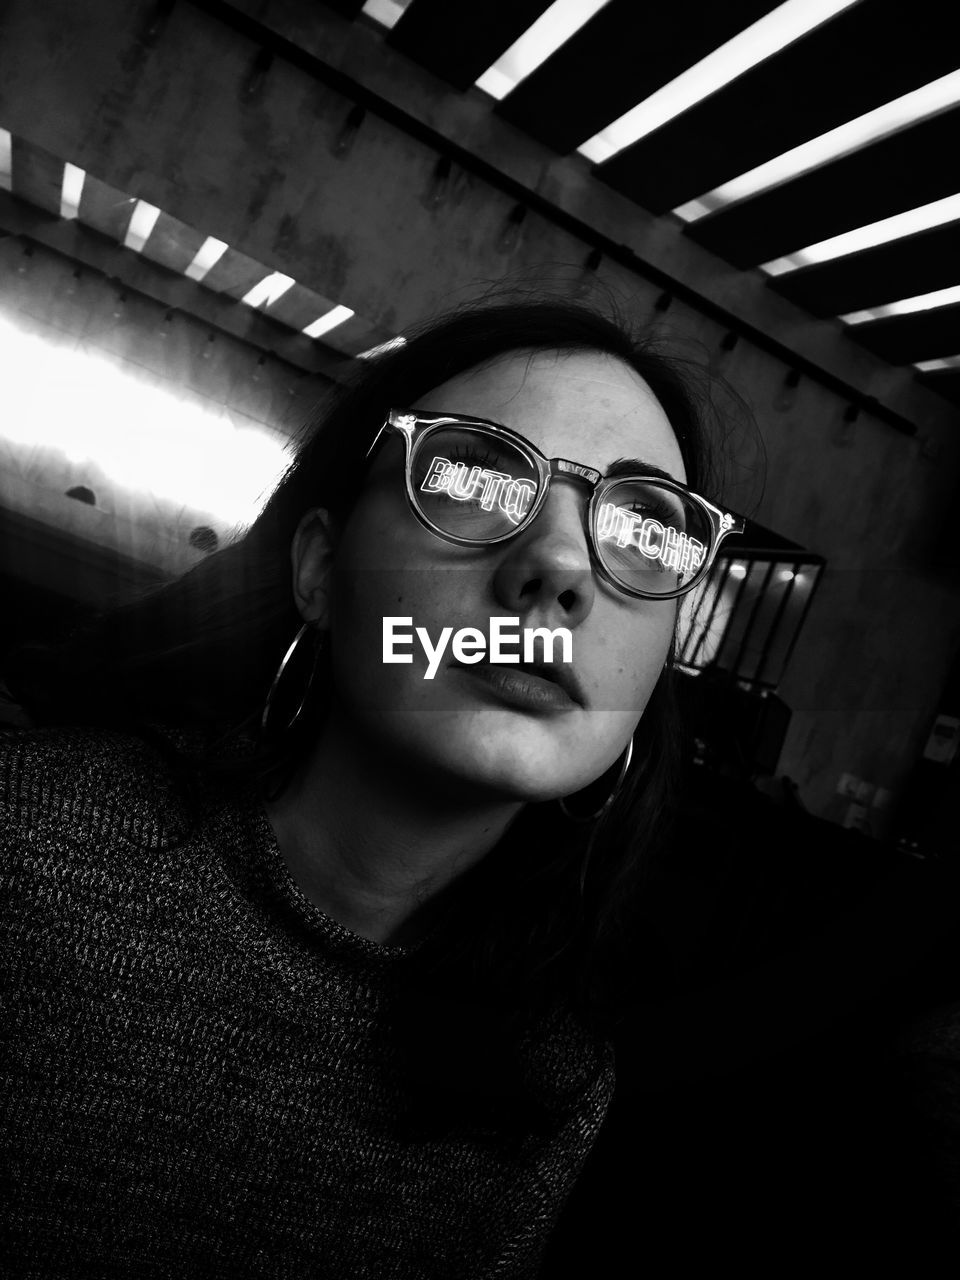 Woman wearing eyeglasses with reflection of text